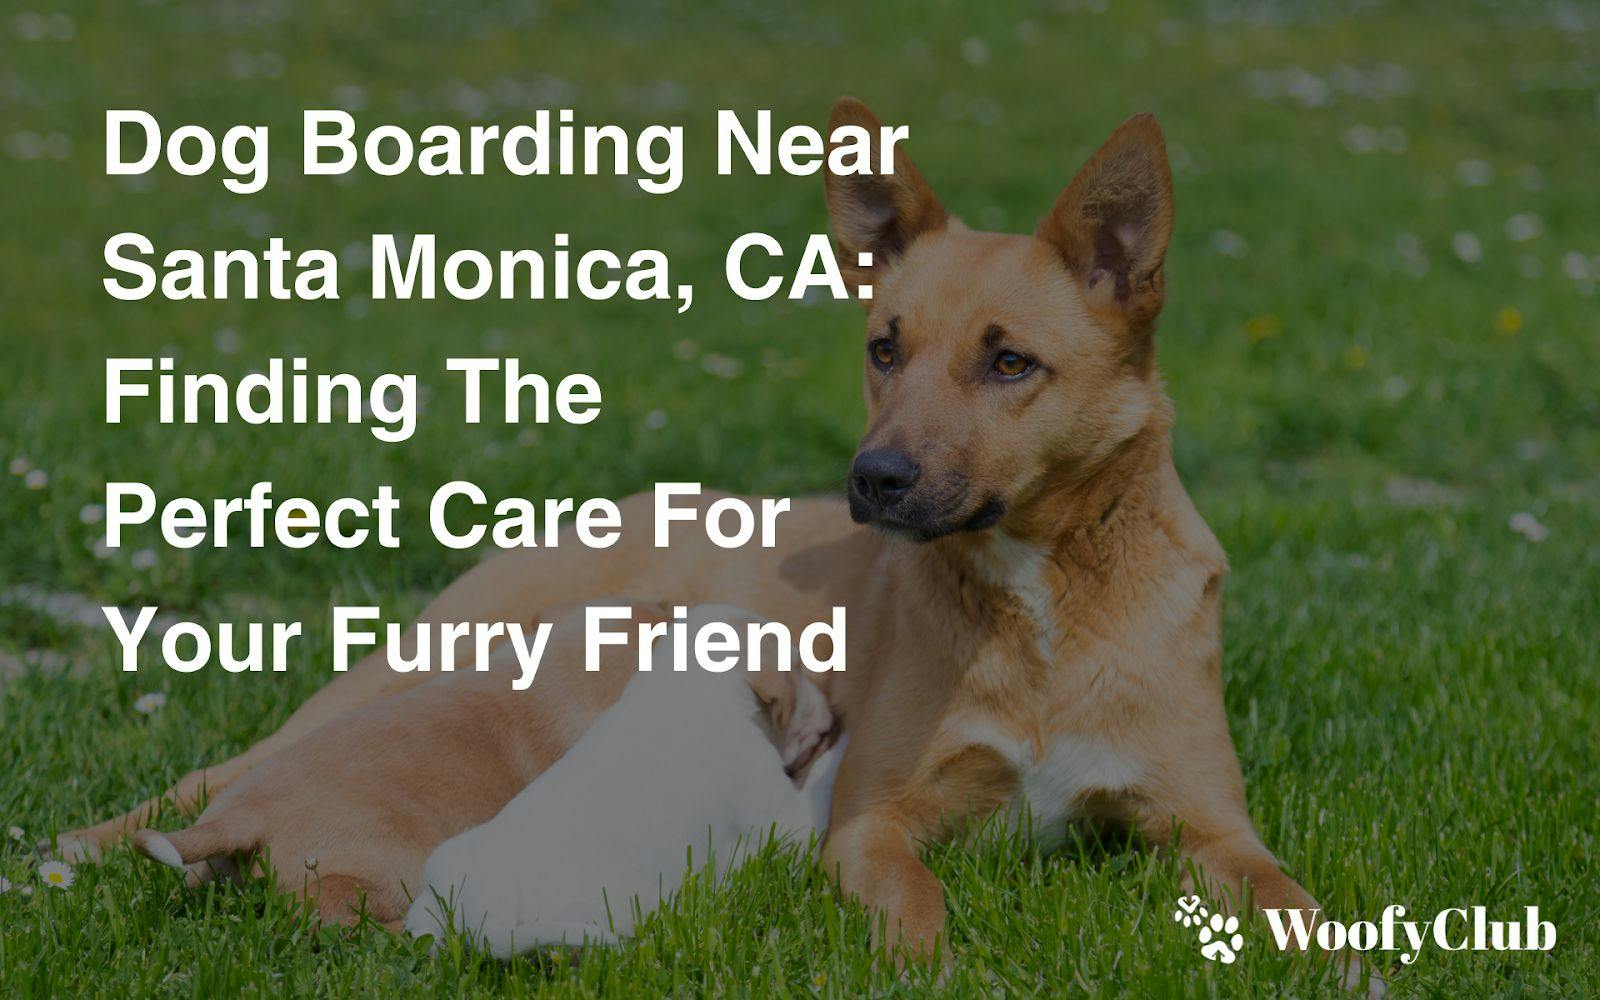 Dog Boarding Near Santa Monica, CA: Finding The Perfect Care For Your Furry Friend